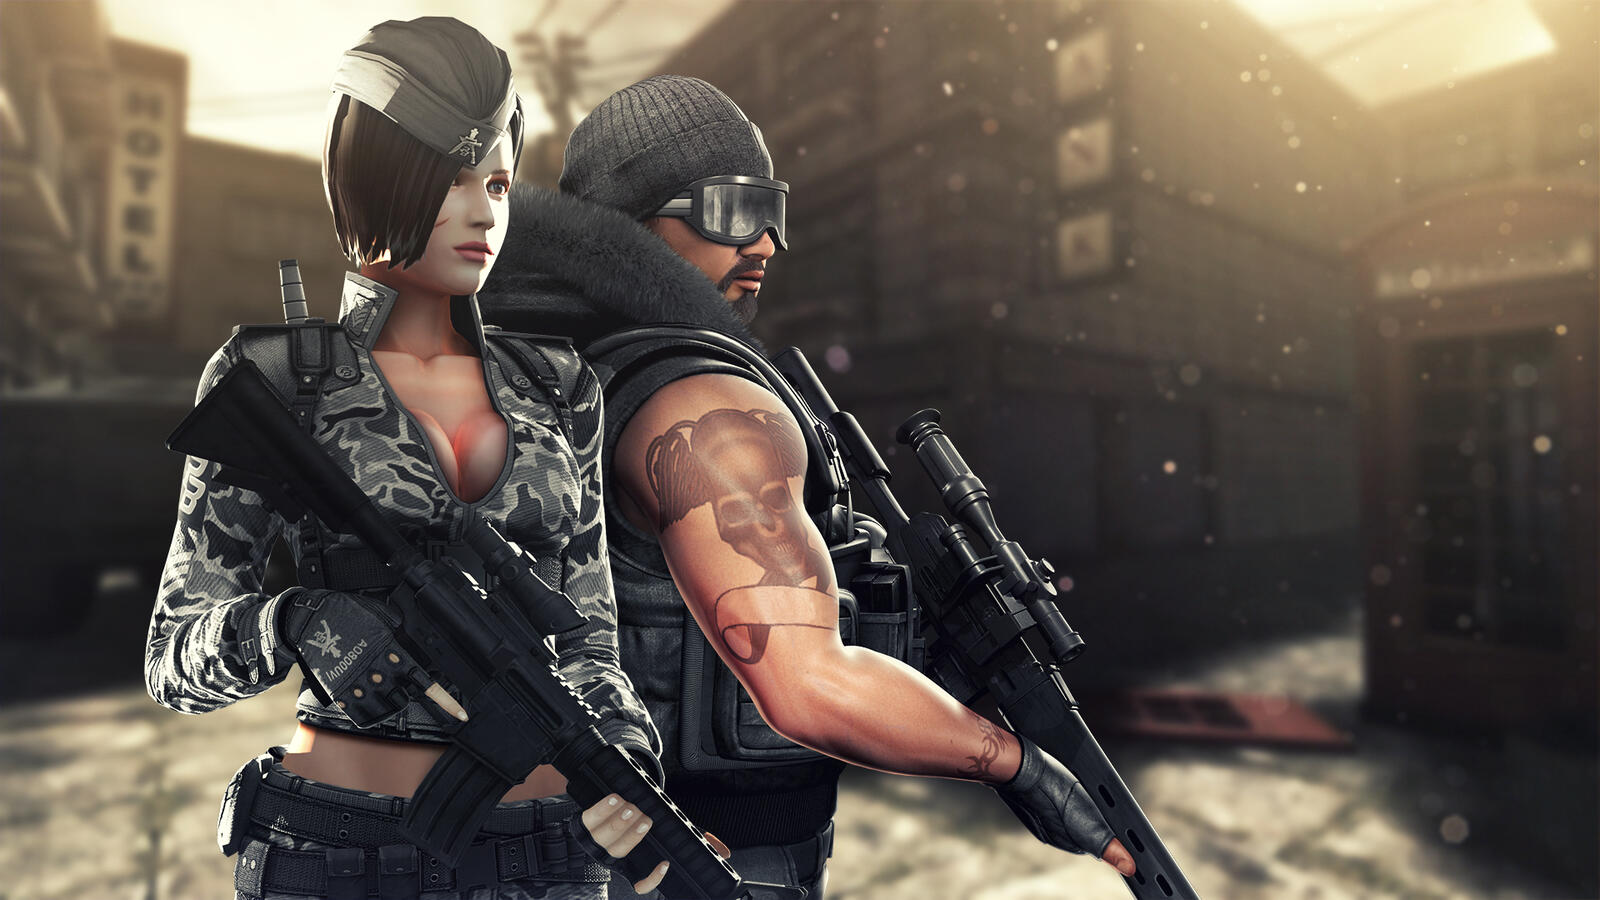 Wallpapers fighters couple machine guns on the desktop